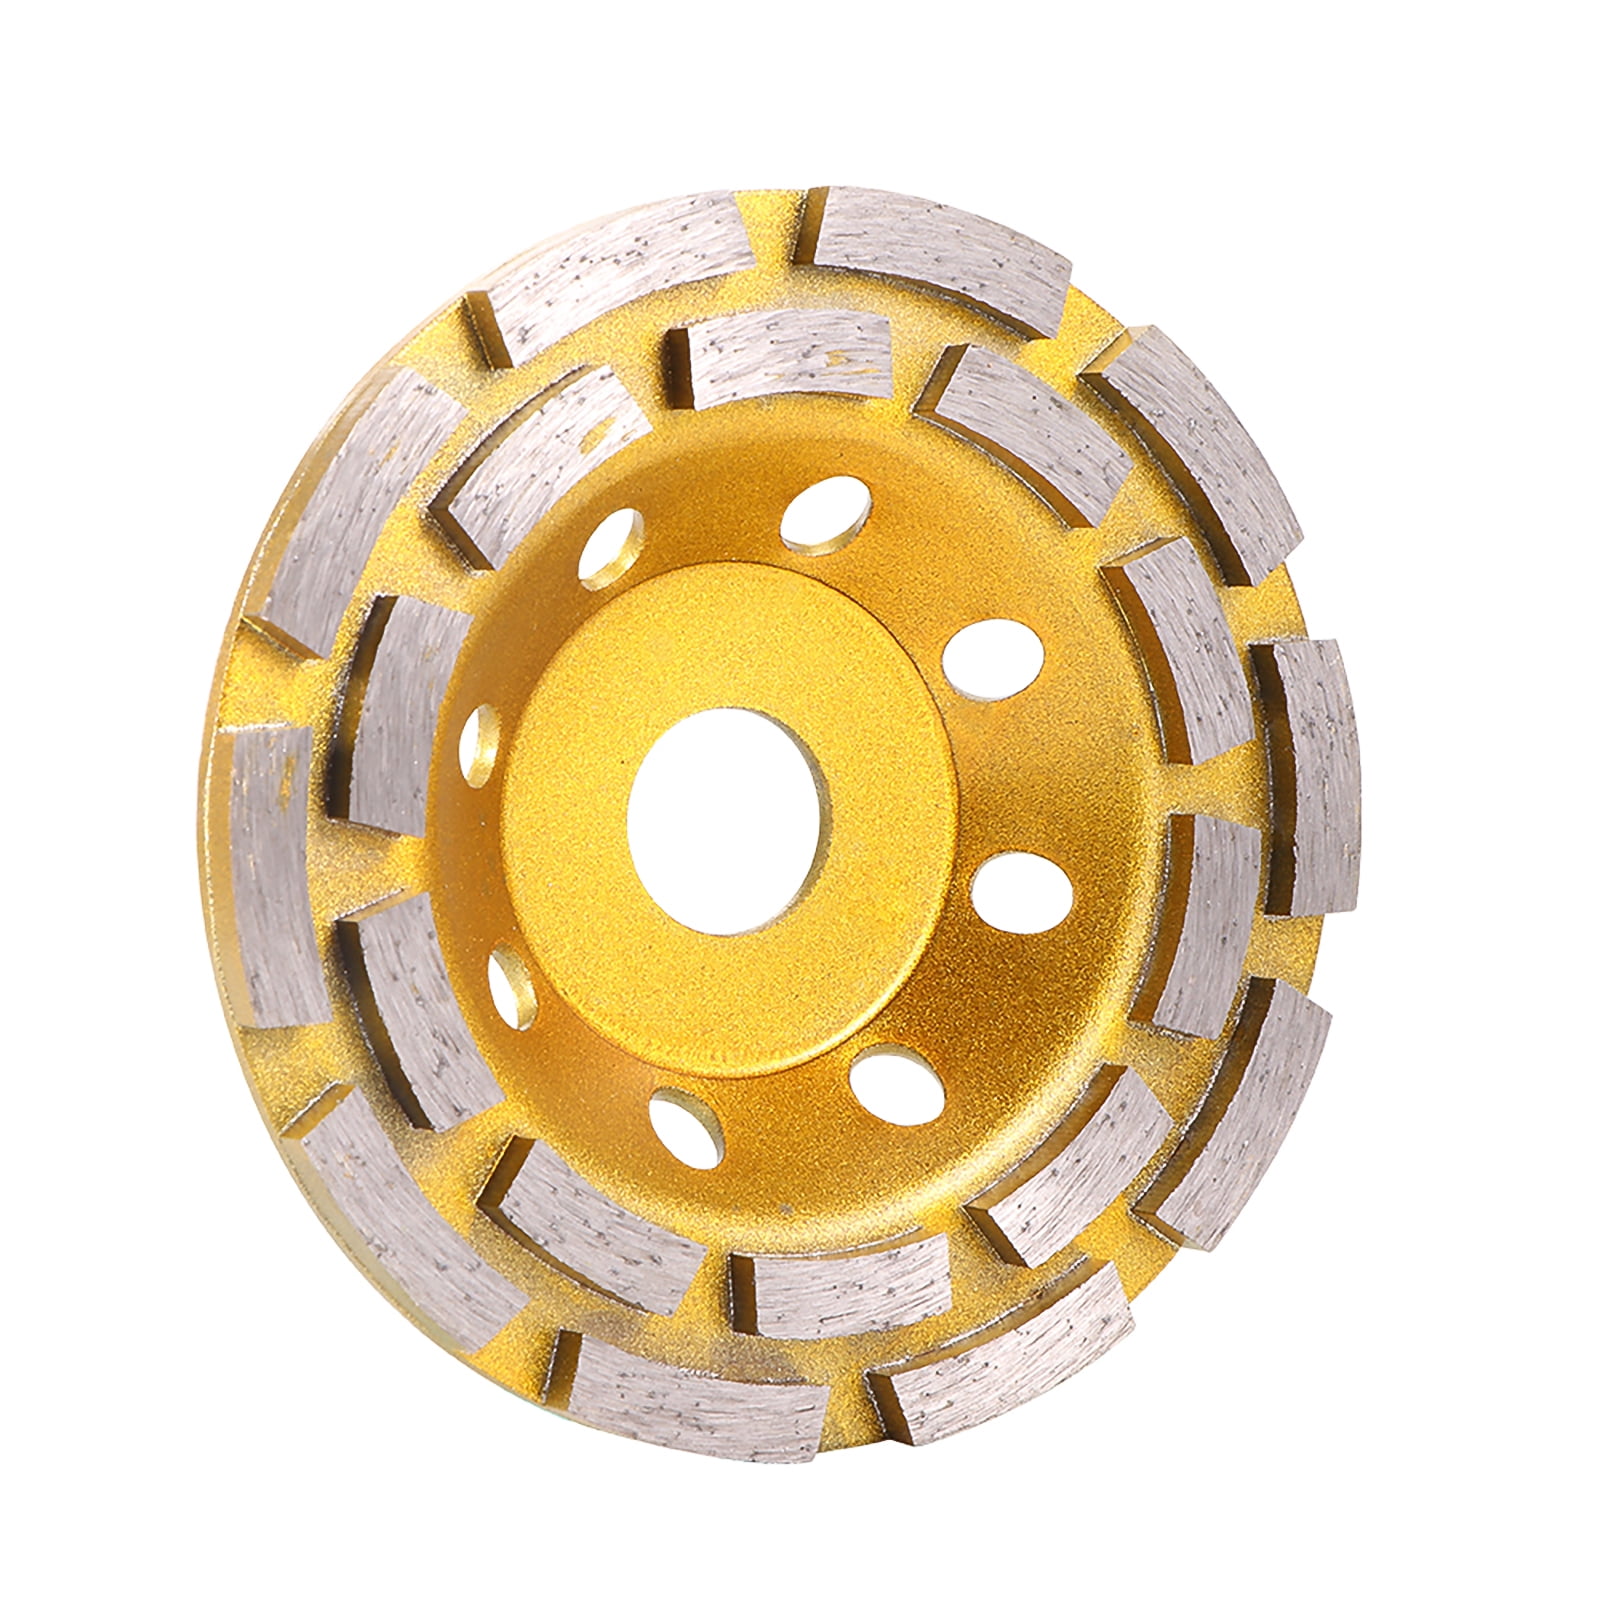 125 mm No. 1 Bevelled Yato Professional Rasp Disc for Angle Grinder Selection 115 mm 125 mm Grinding Disc Wood Disc Wood Flex Wood Art